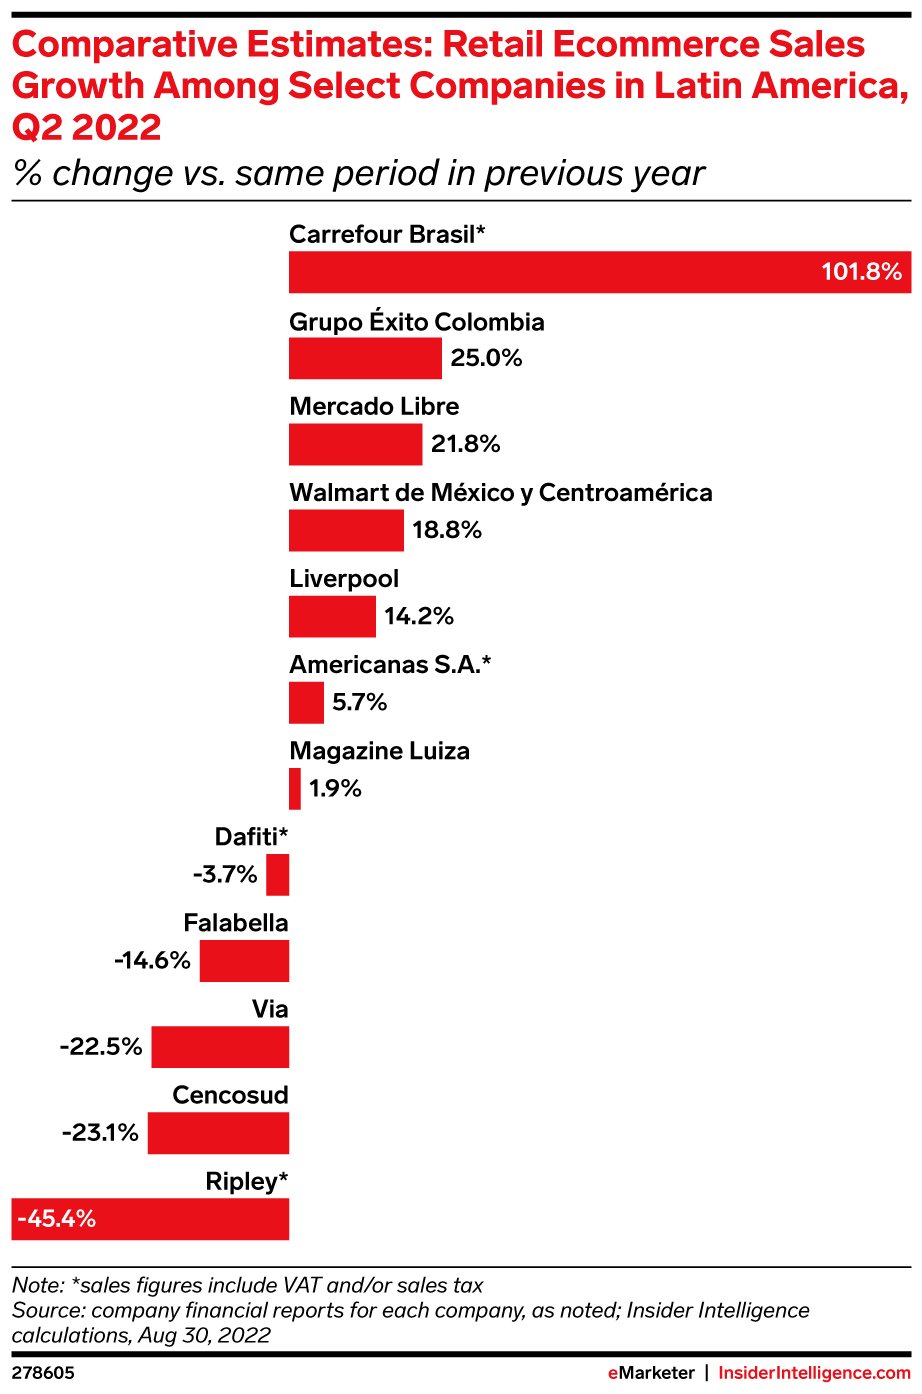 eMarketer-comparative-estimates-retail-ecommerce-sales-growth-among-select-companies-latin-america-q2-2022-change-vs-same-period-previous-year-278605.jpeg